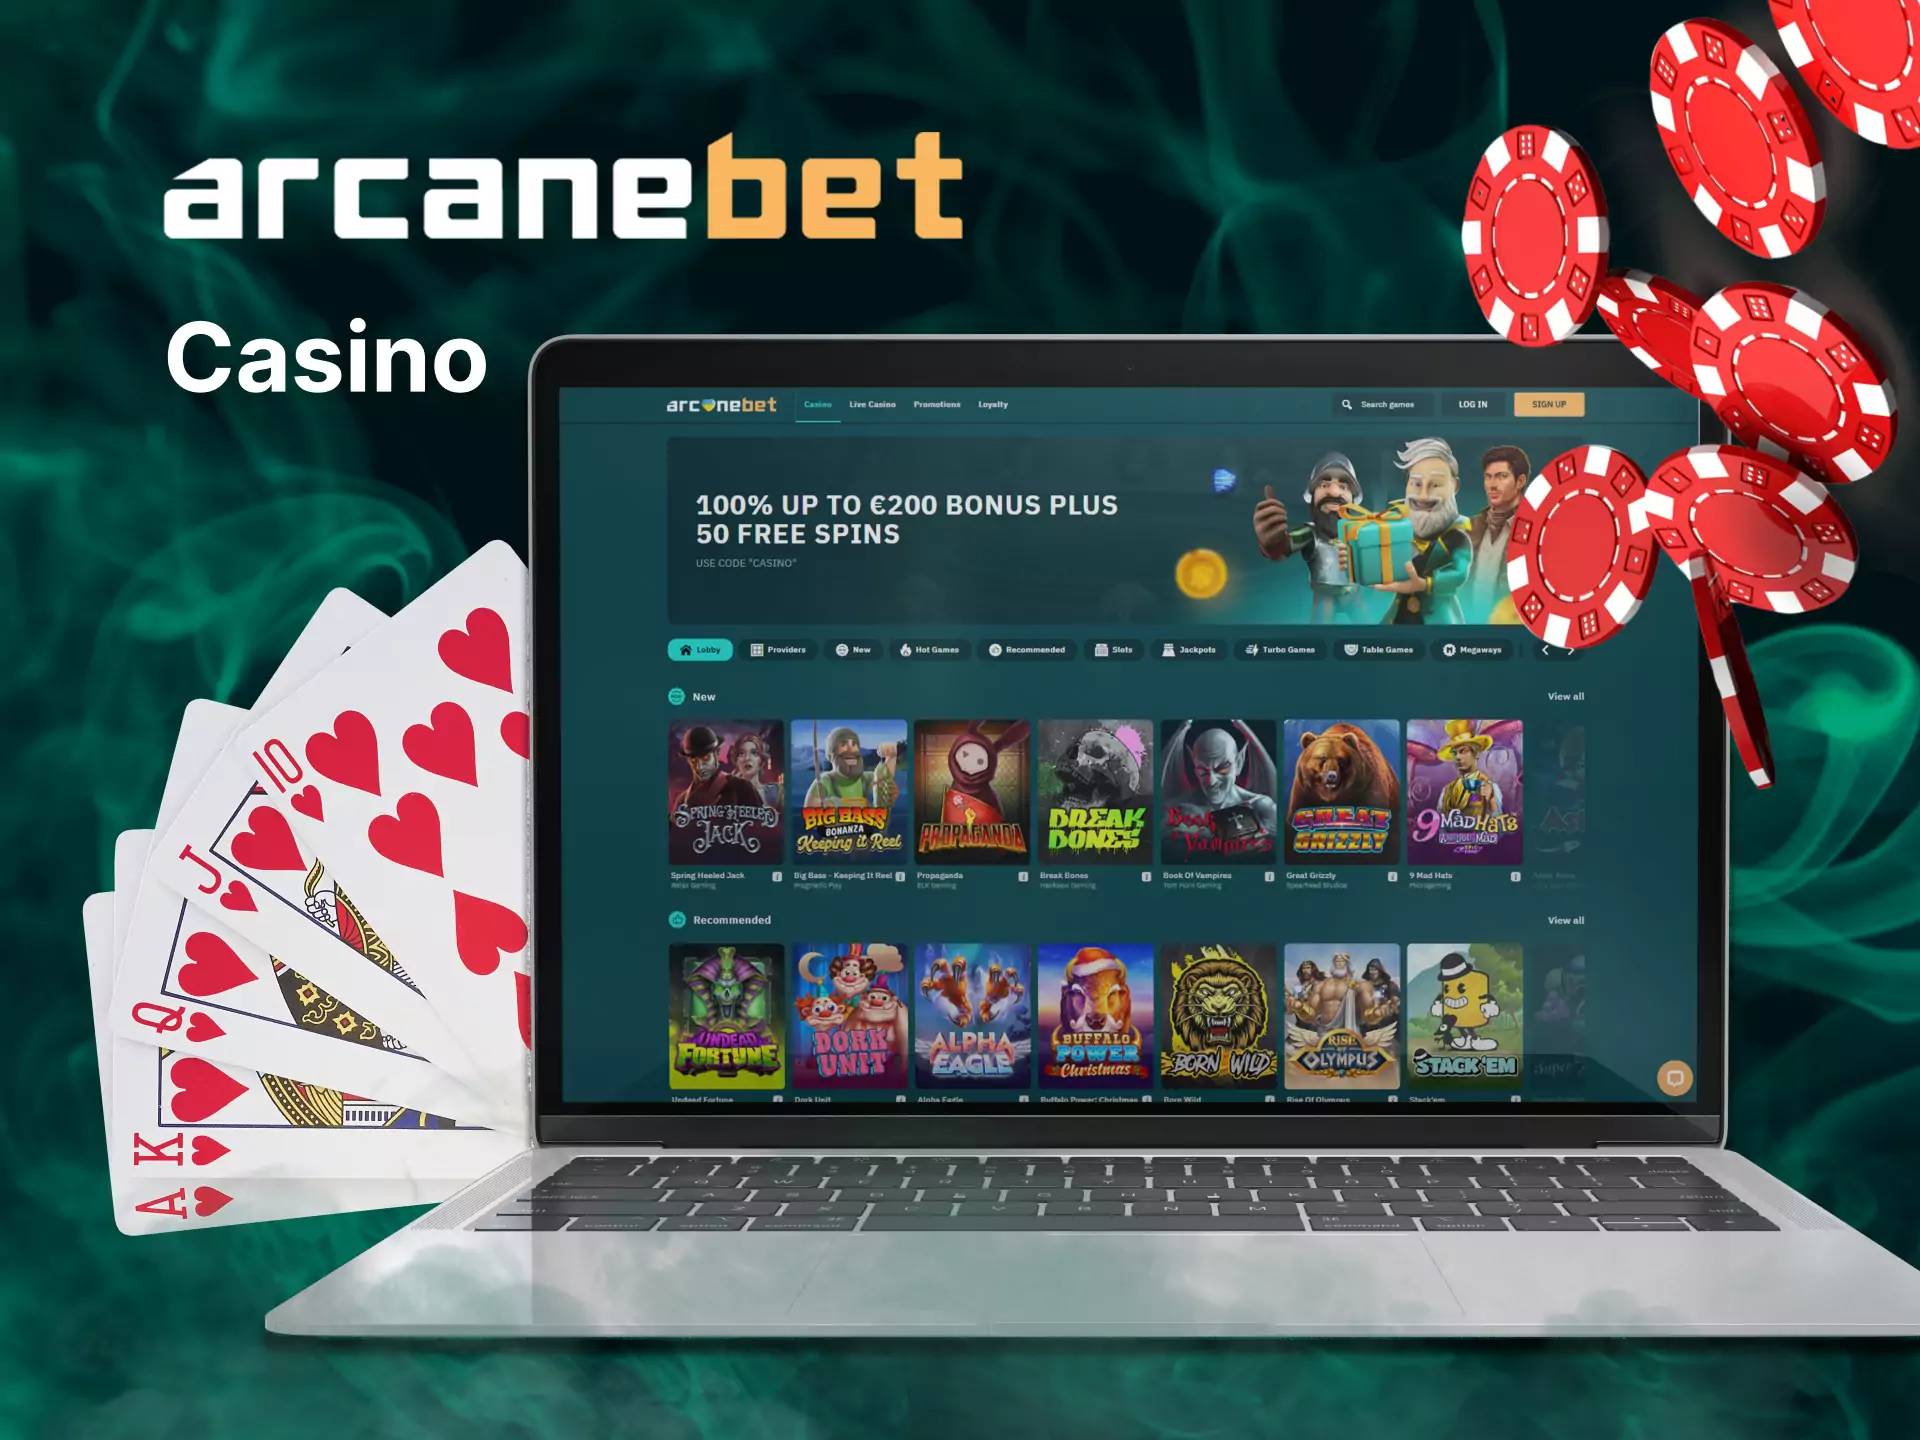 Try Arcanebet Casino, place bets and win.